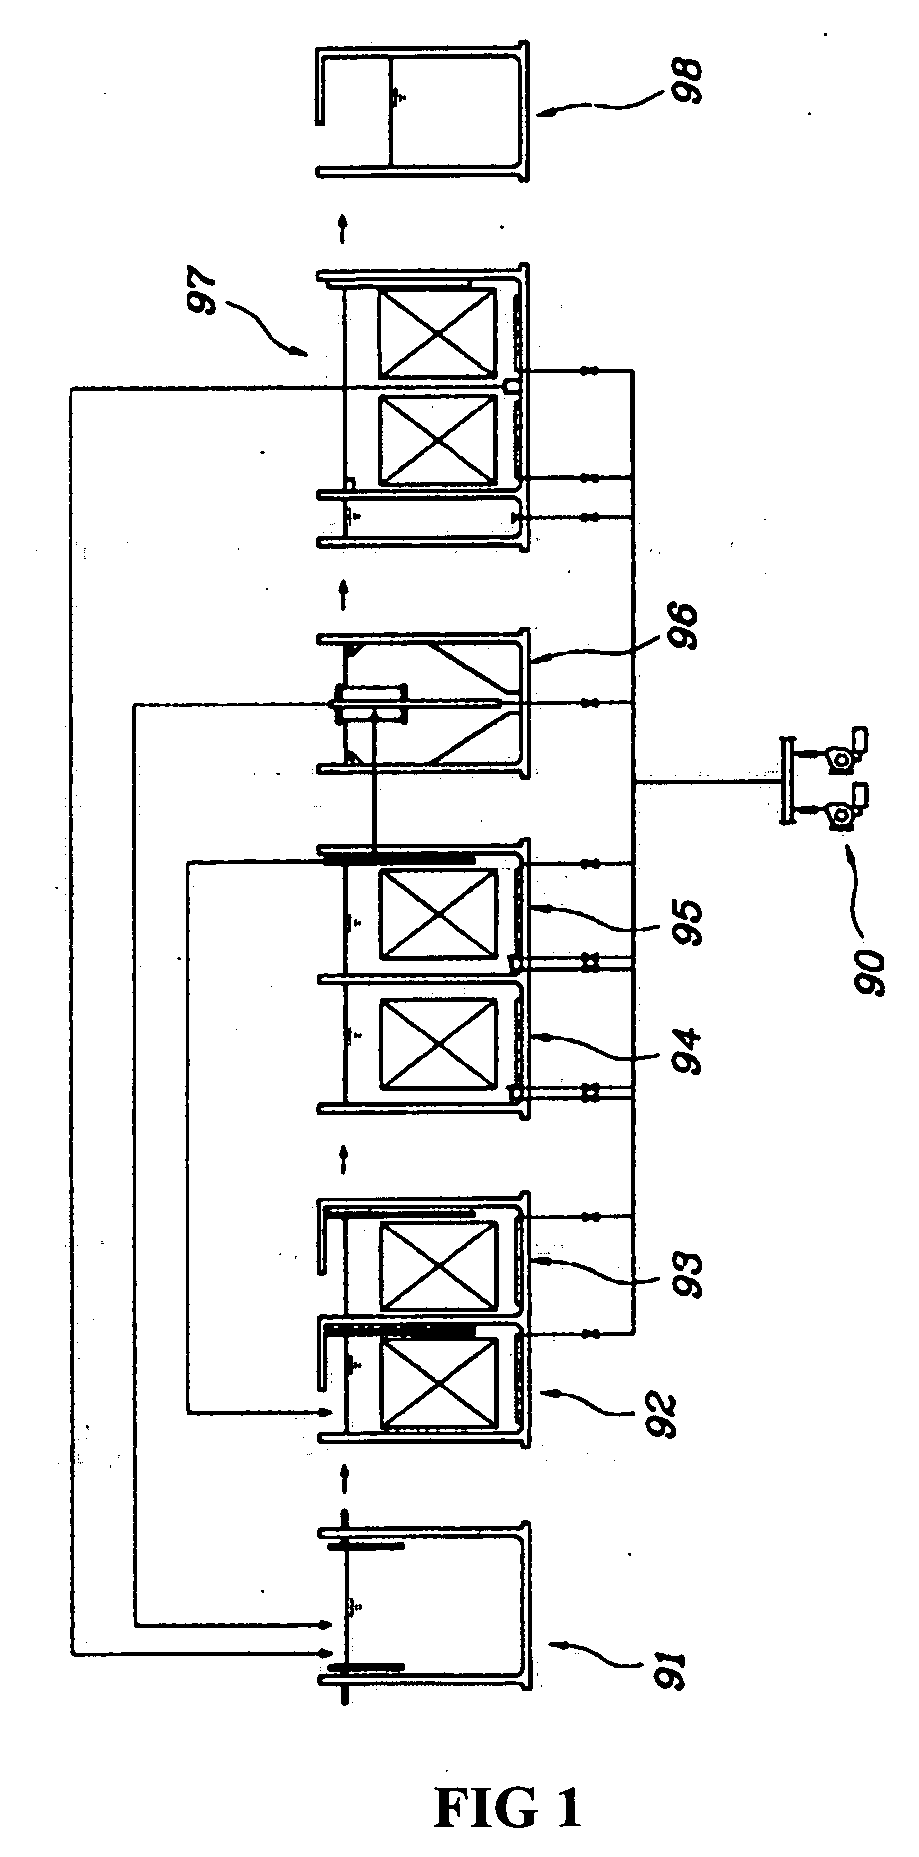 Apparatus and method for treating wastewater using contact media